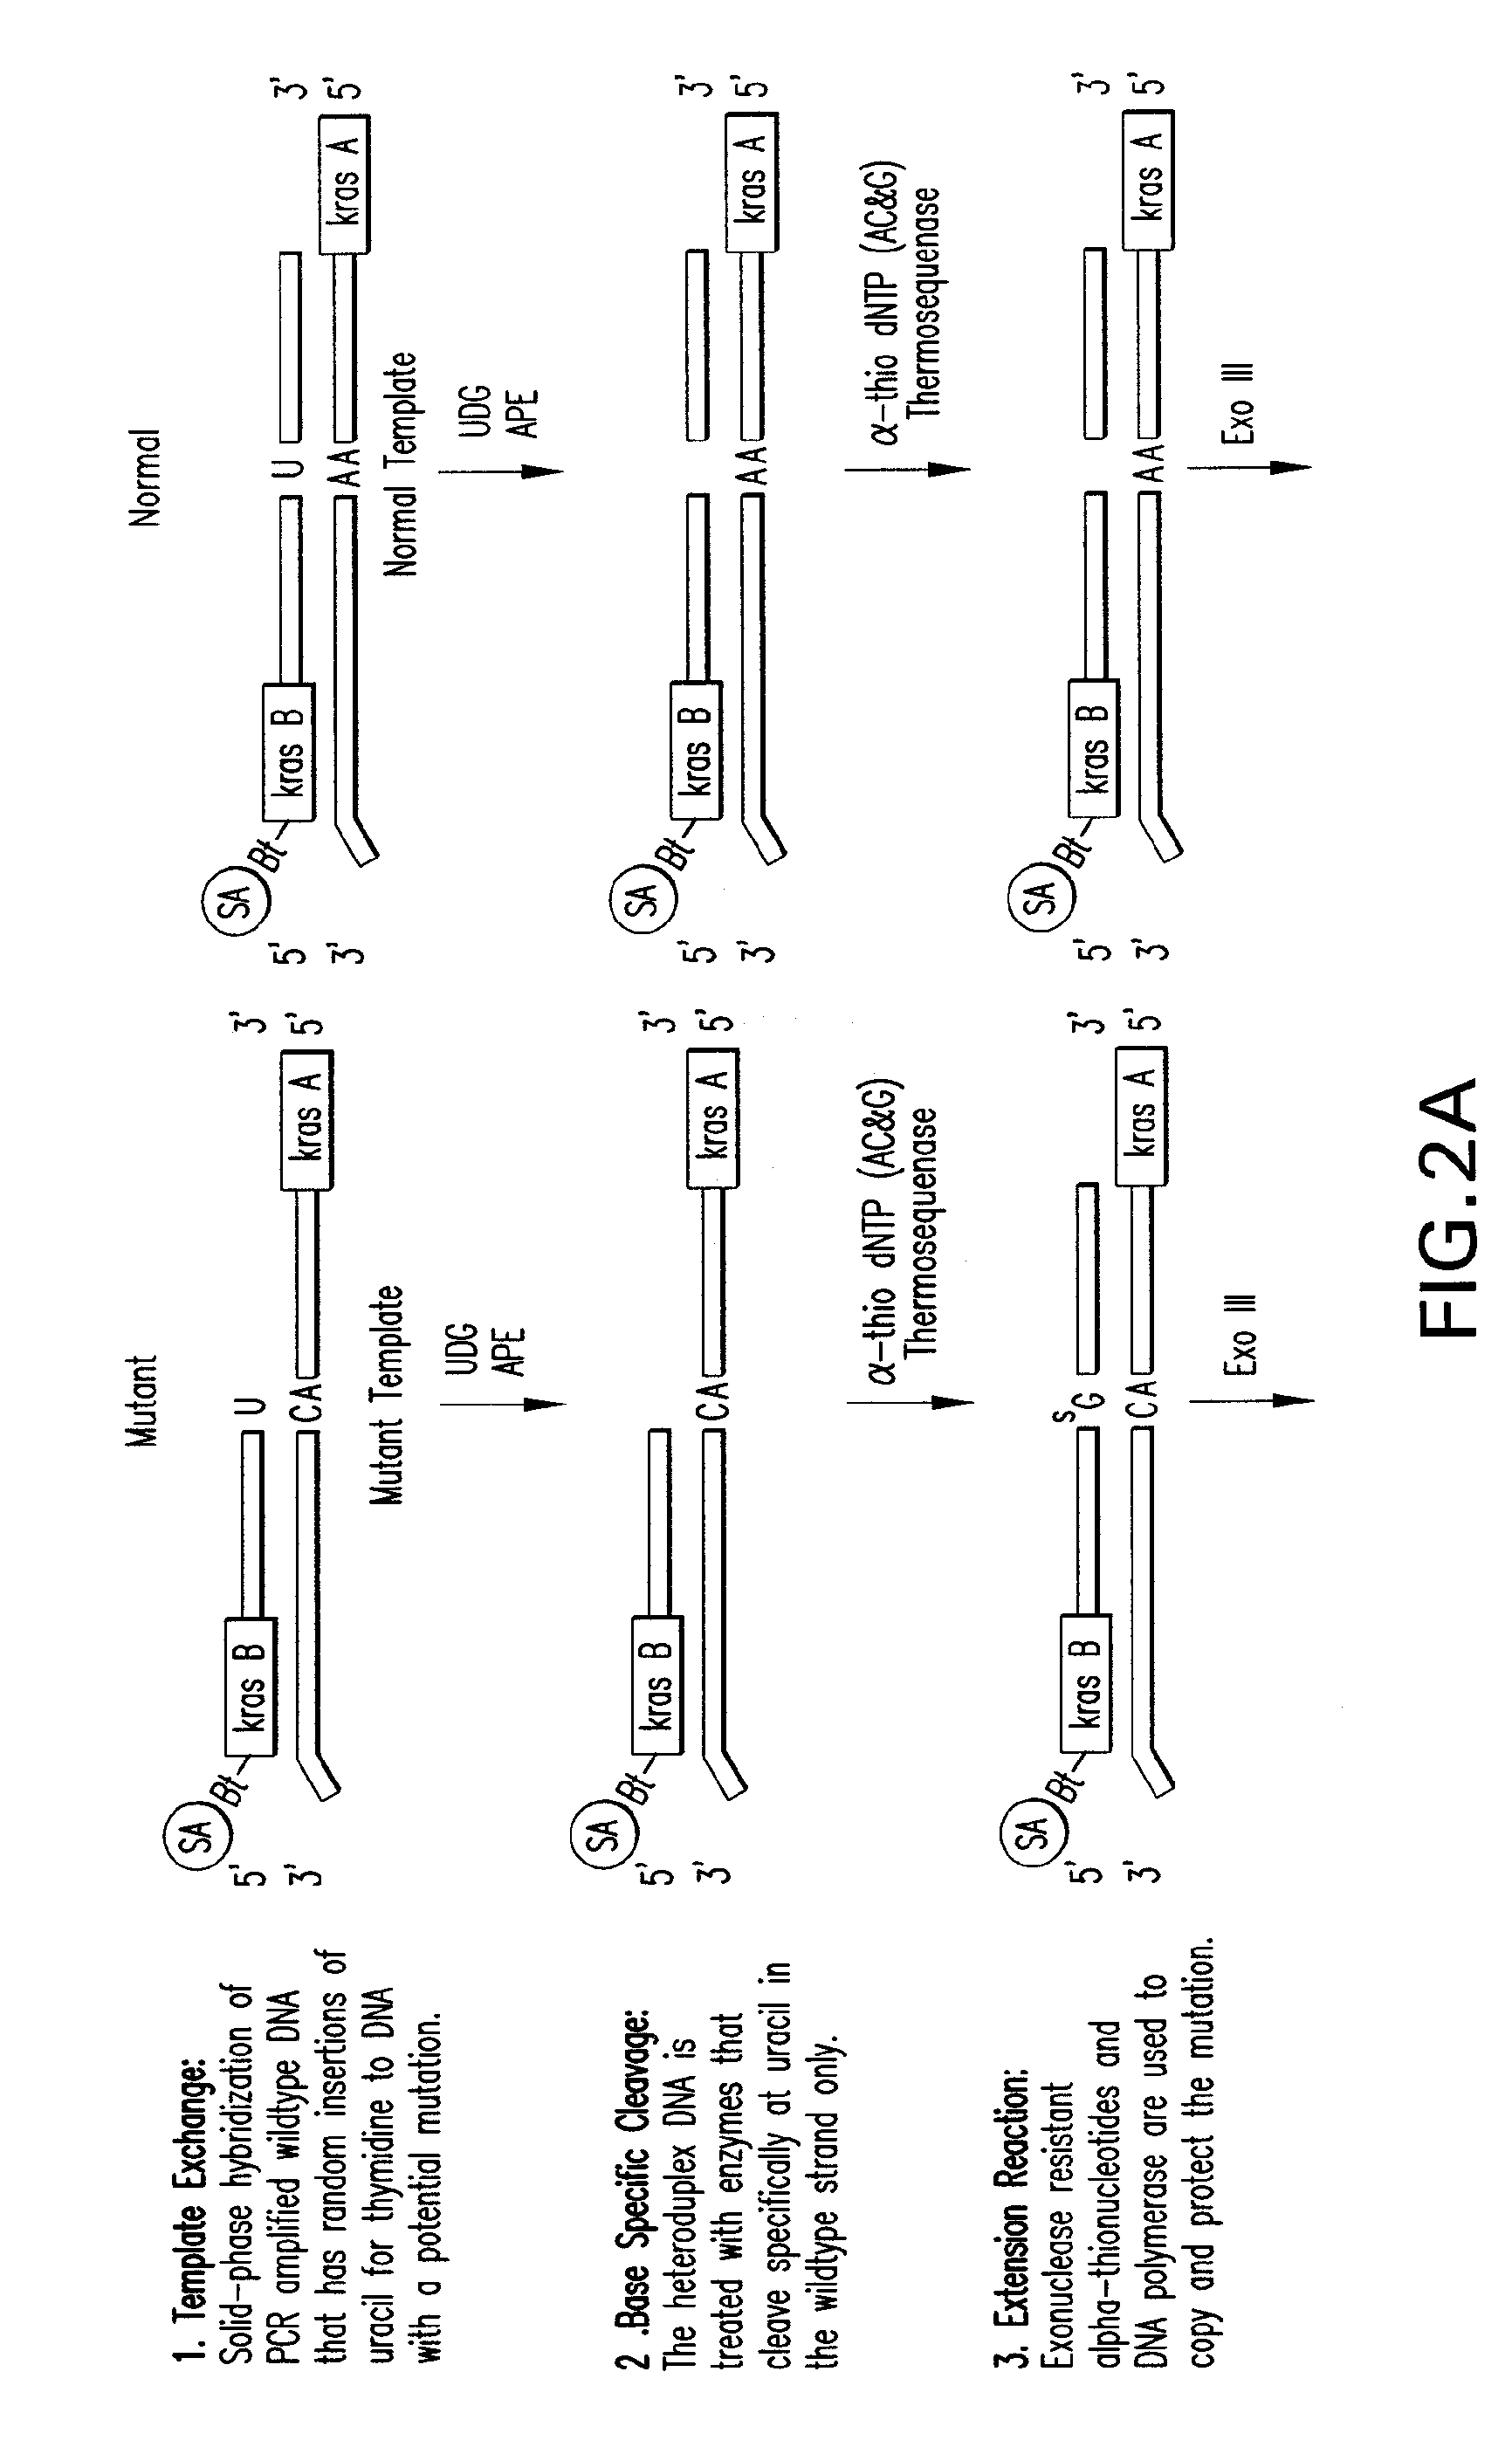 Methods of screening nucleic acids for single nucleotide variations